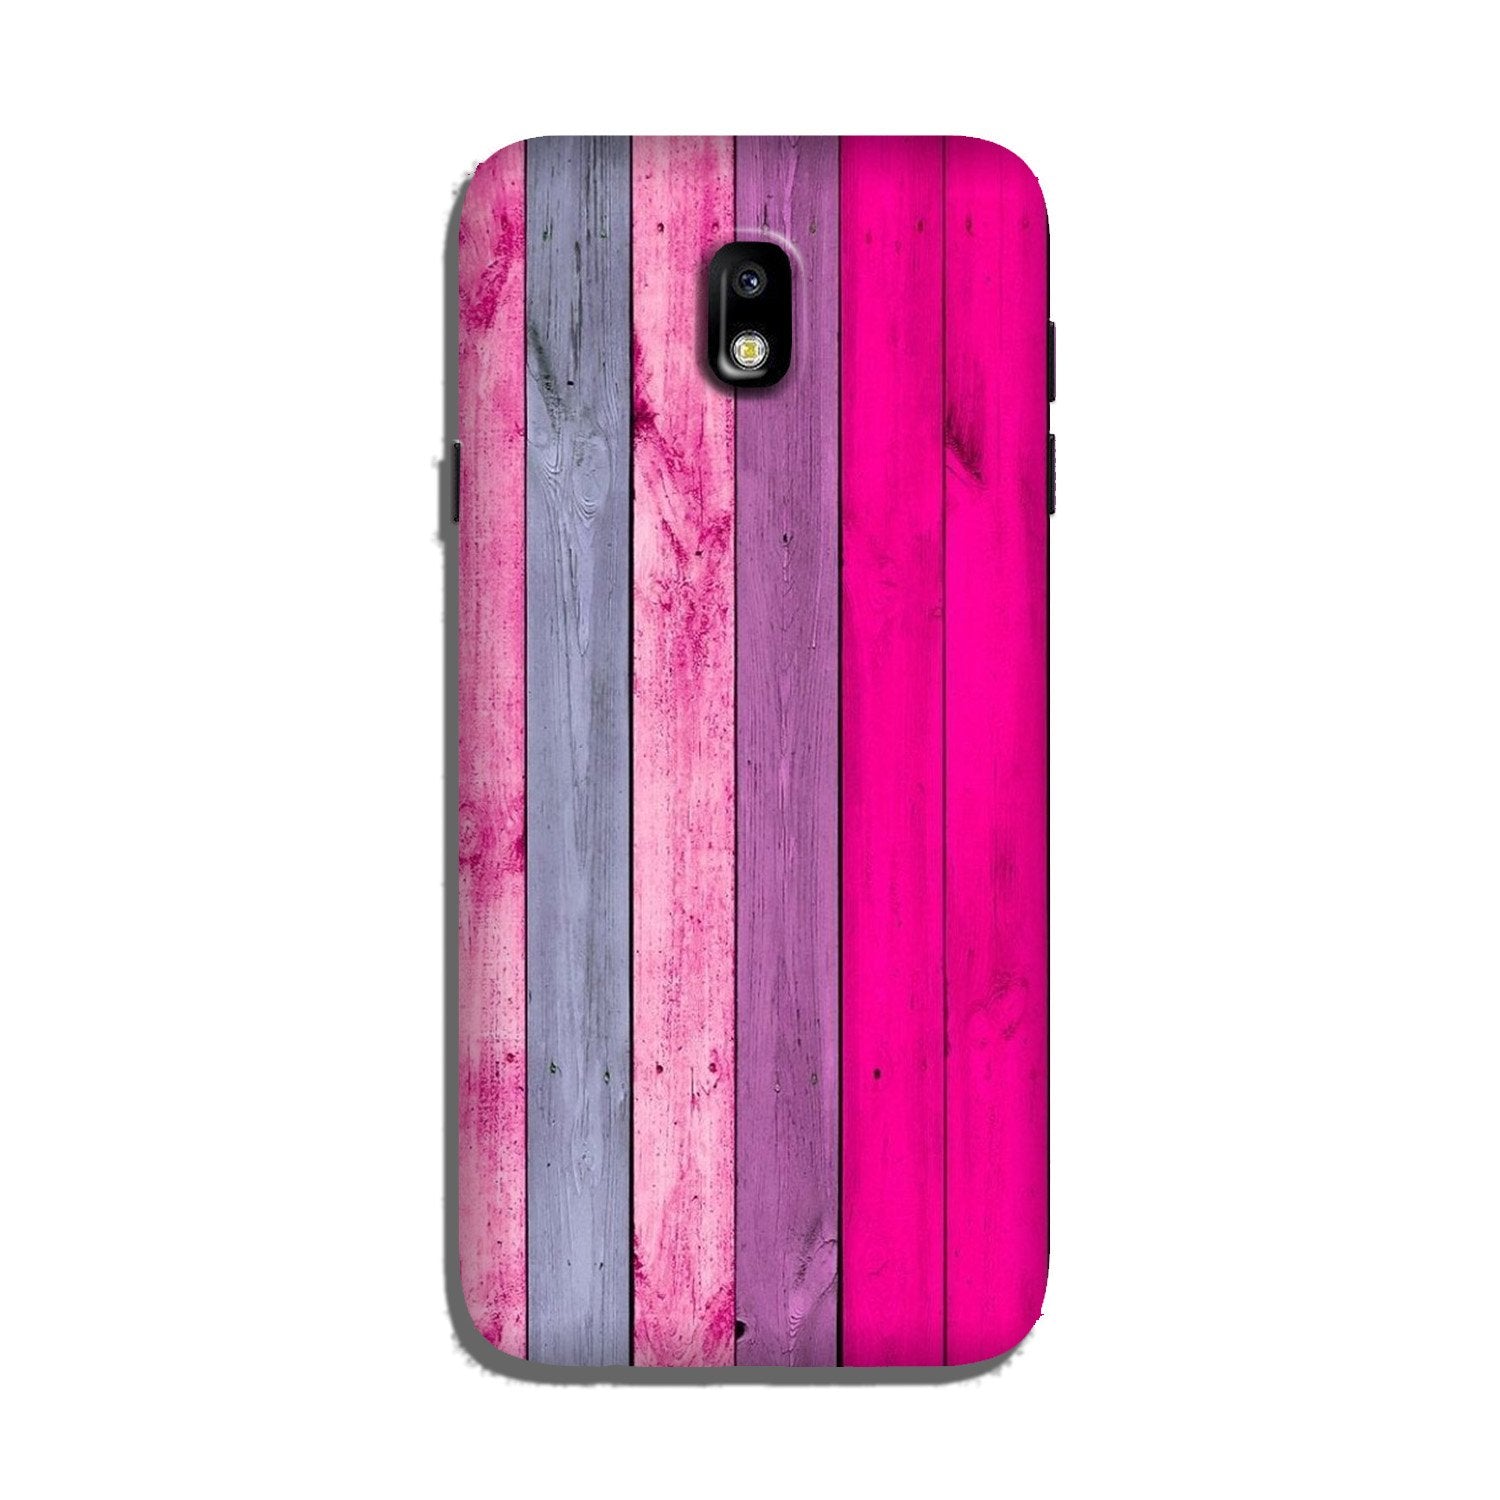 Wooden look Case for Galaxy J3 Pro